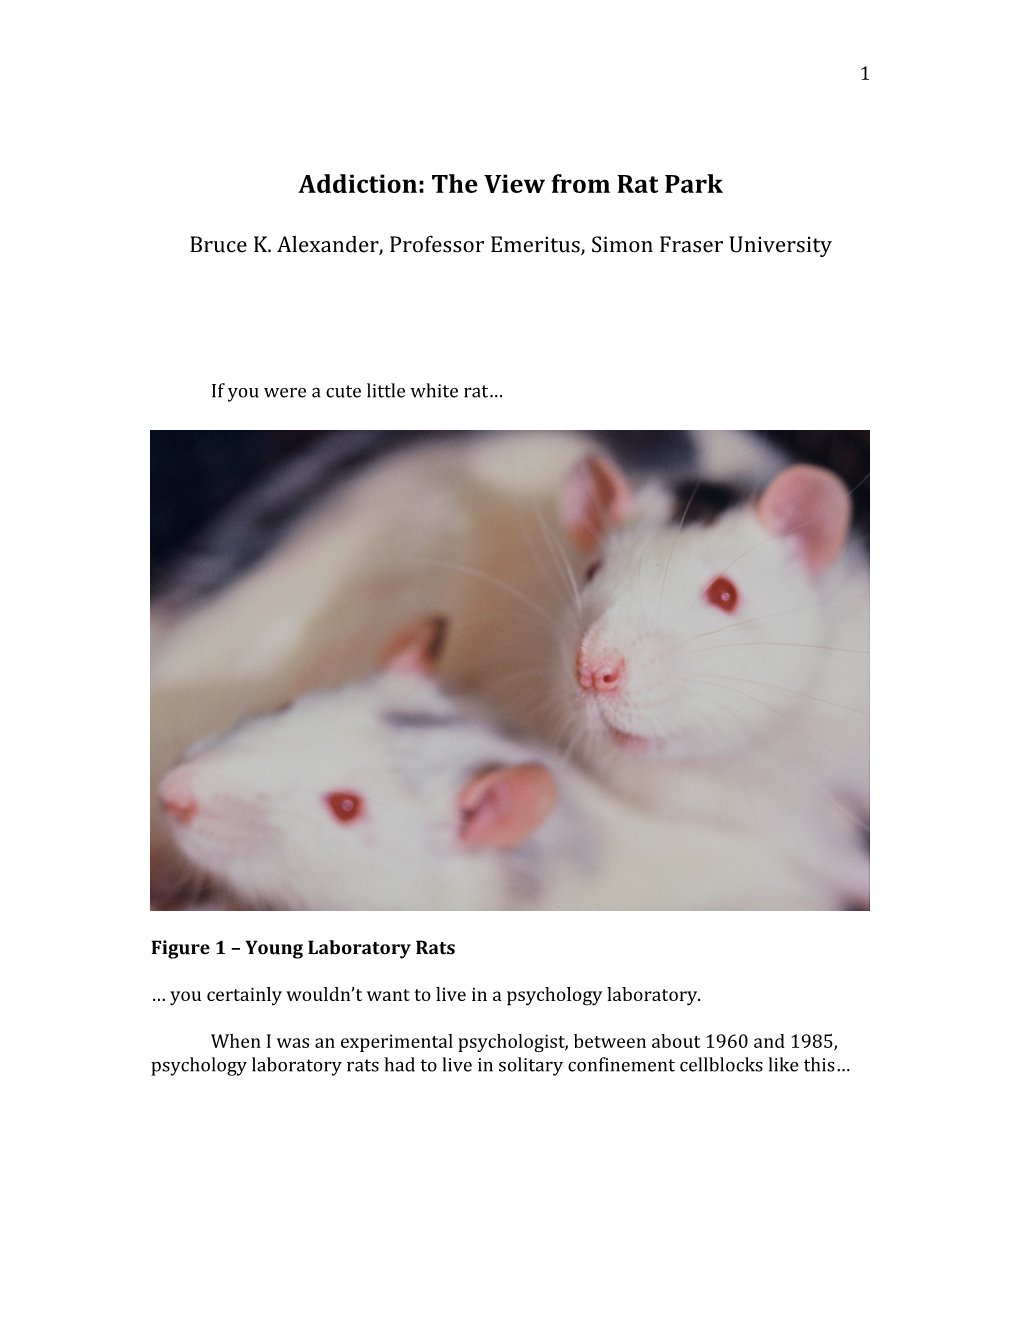 Addiction: the View from Rat Park